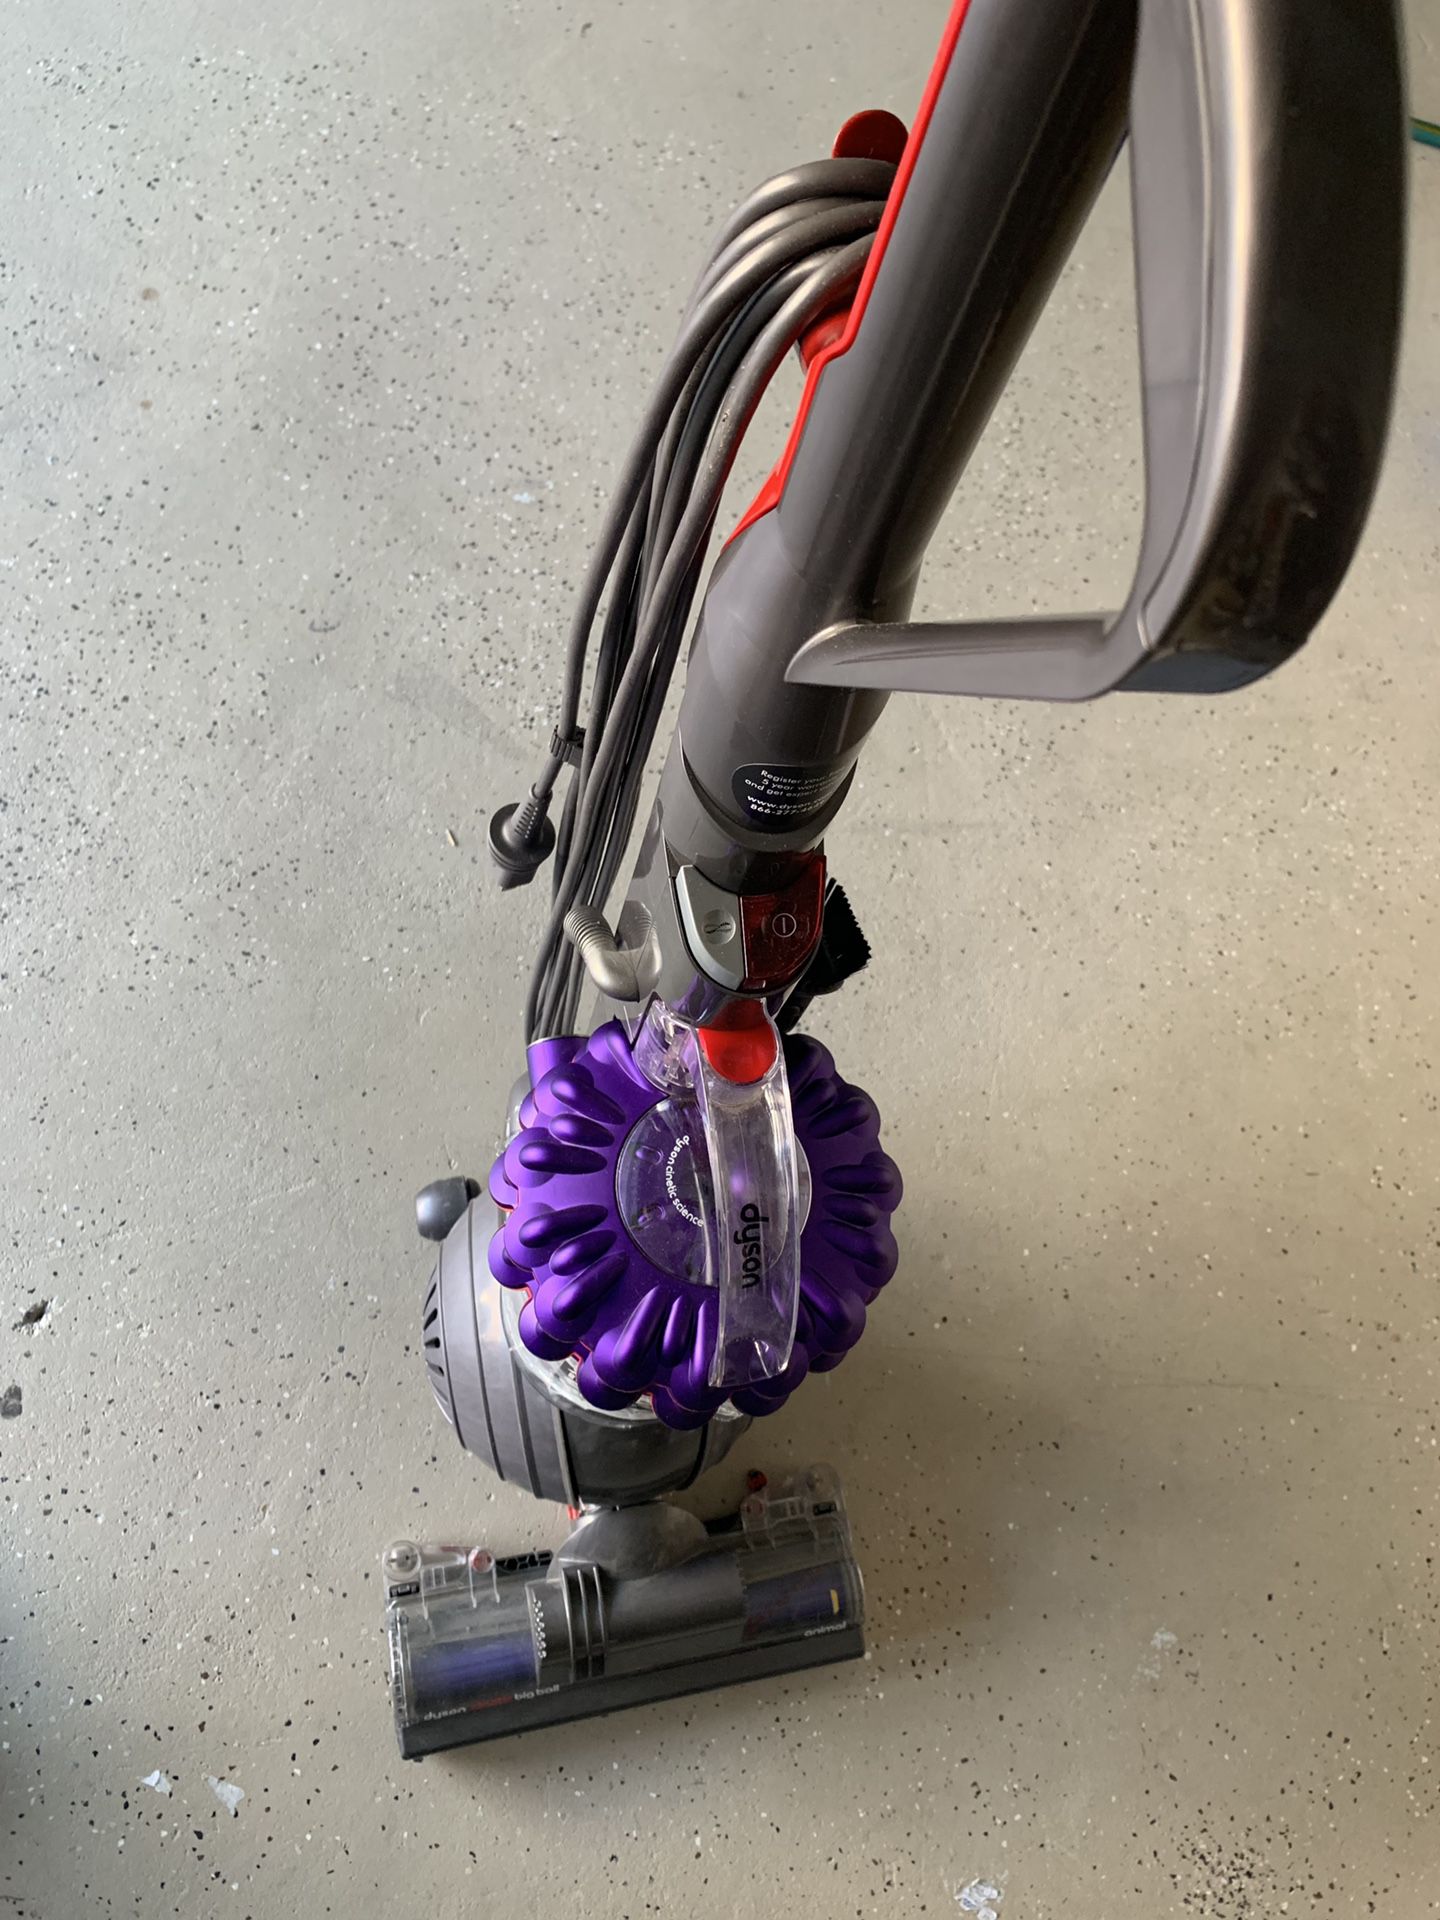 Dyson cinetic big ball animal upright vacuum cleaner never used demo unit at store